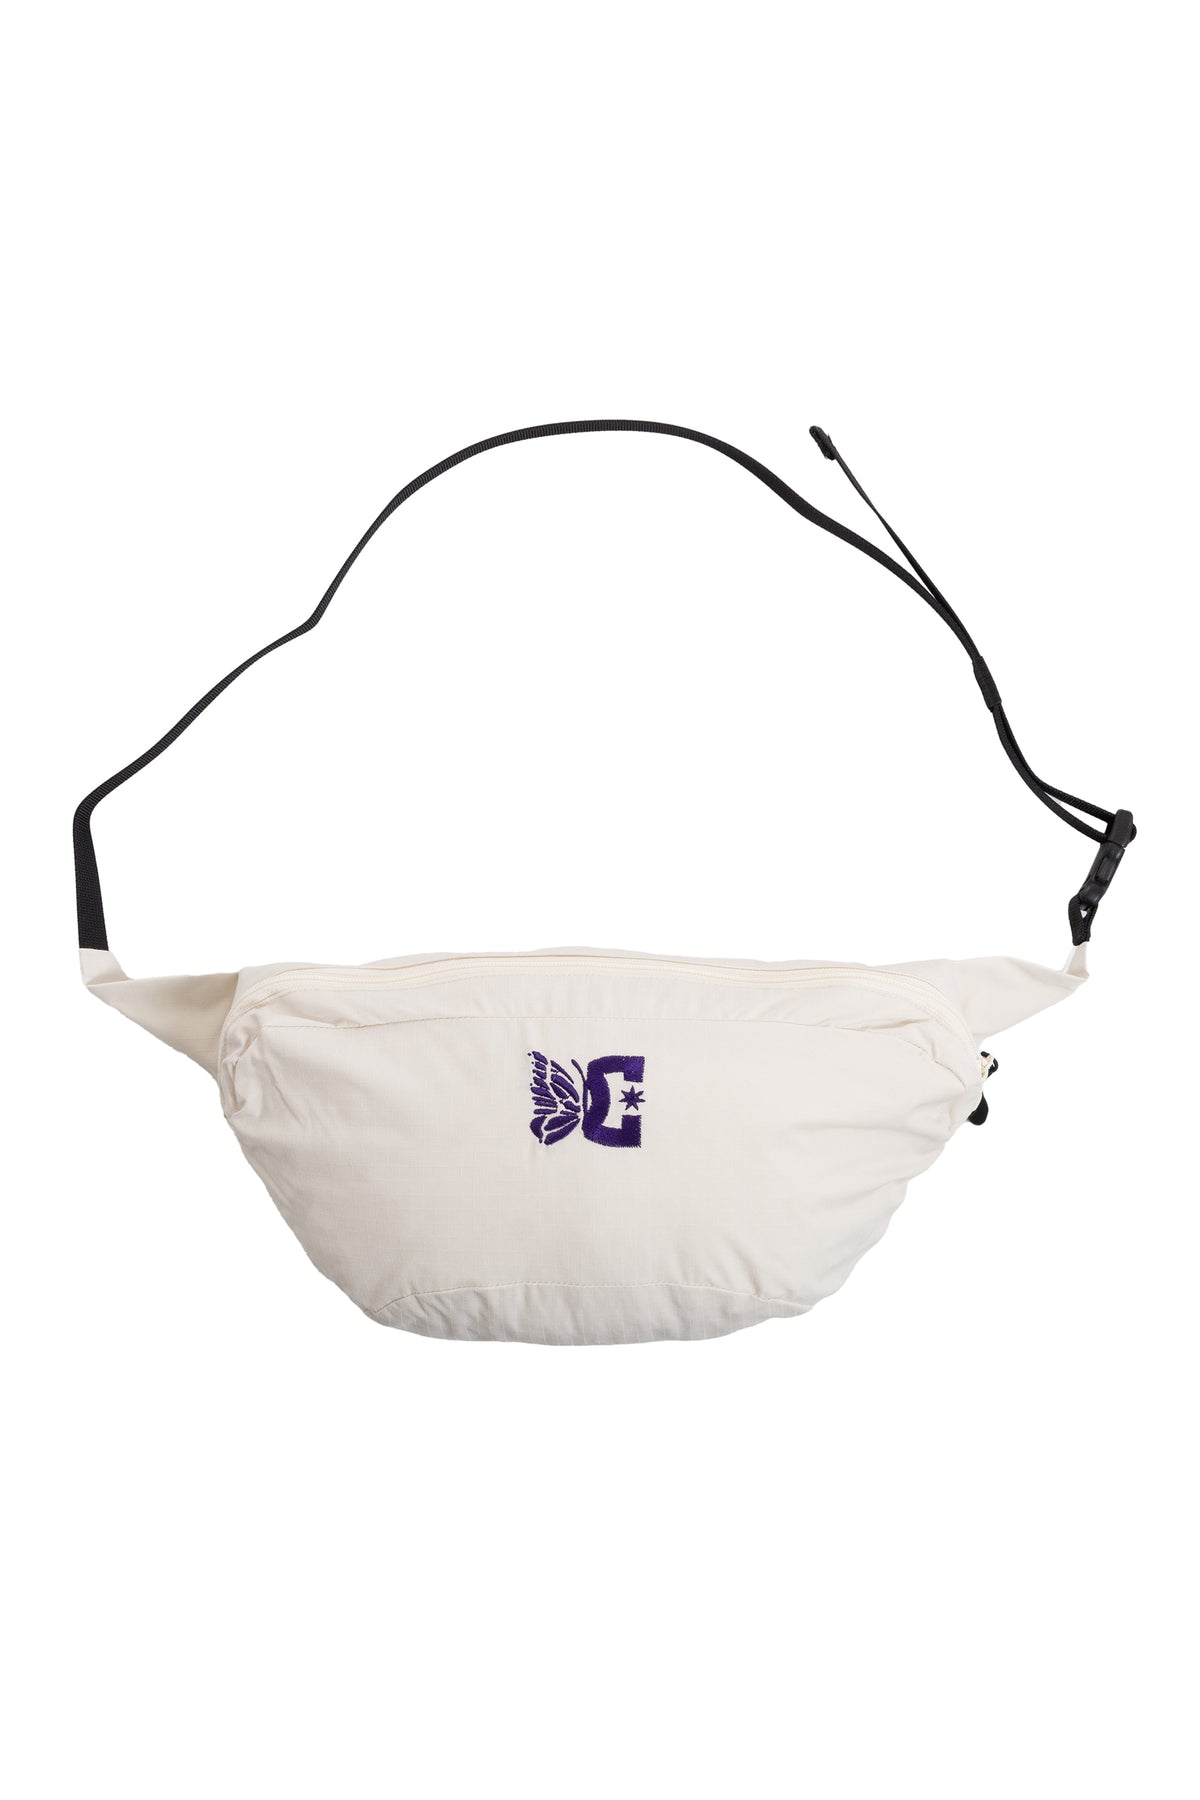 HIP BAG - POLY RIPSTOP / IVORY